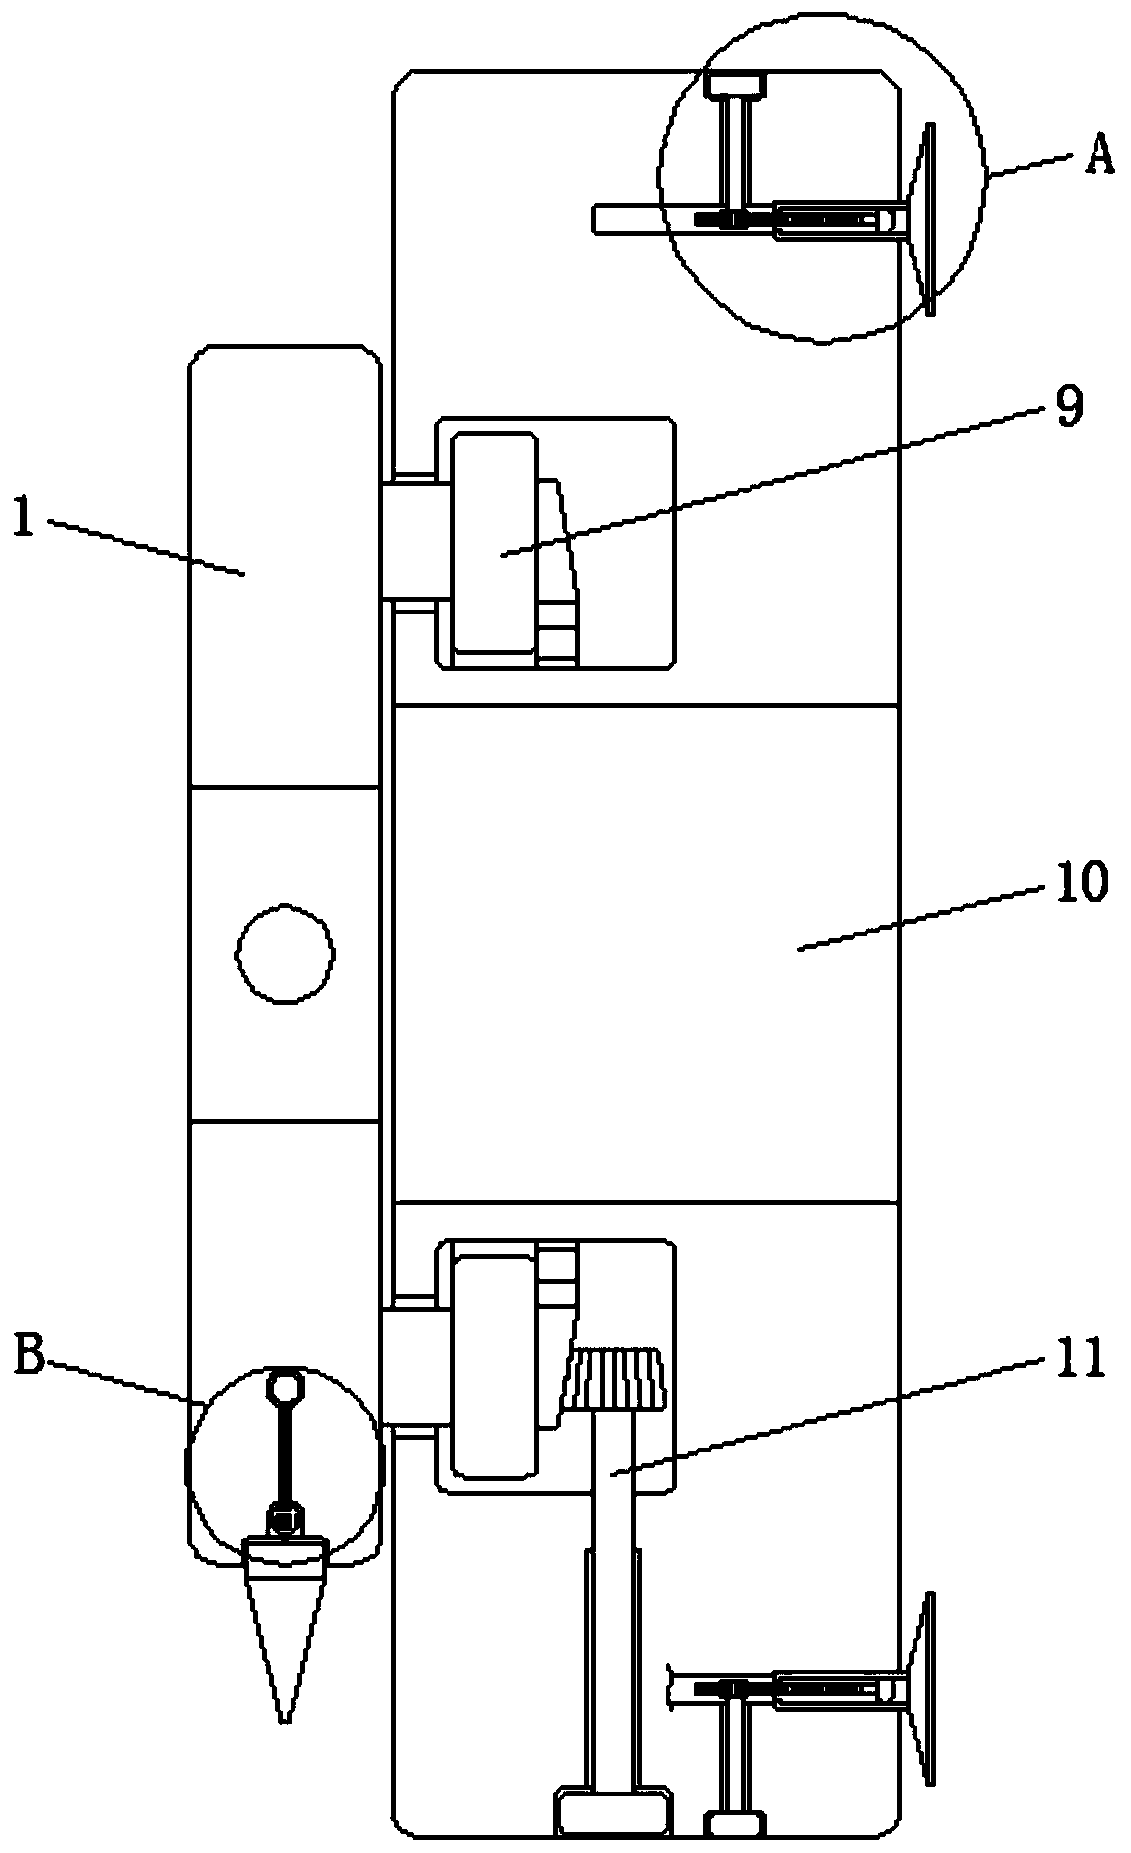 Measuring caliper used for buildings capable of measuring multiple angle step hole diameters